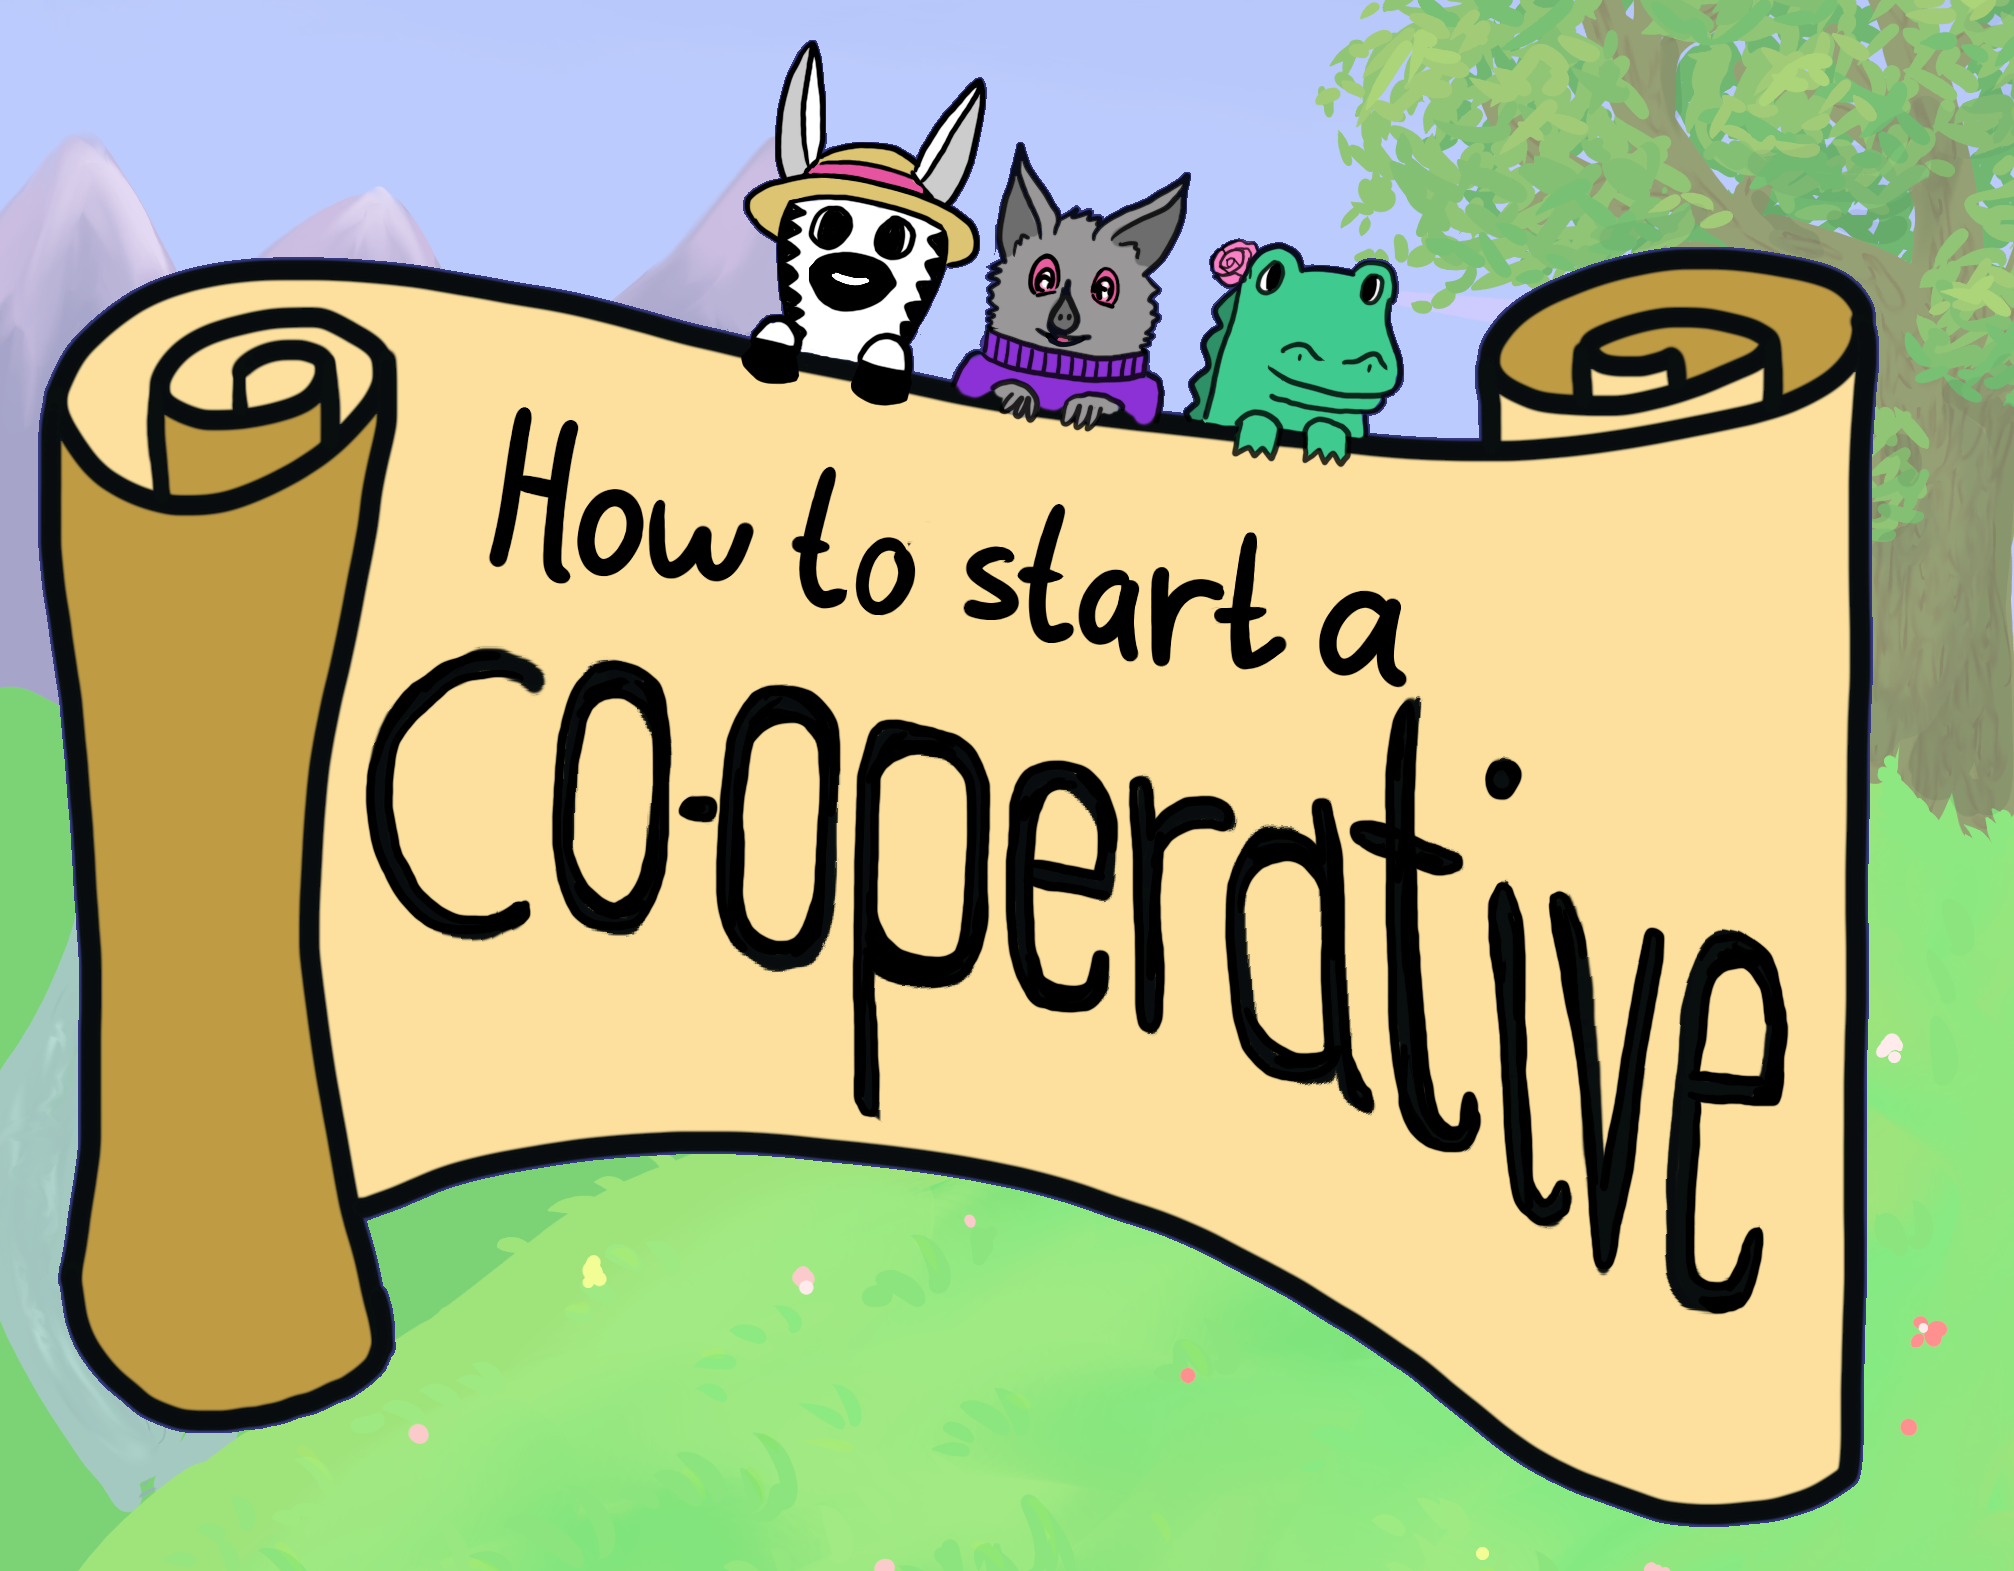 A zebra, a bat, and an alligator above a scroll saying 'How to start a co-operative'